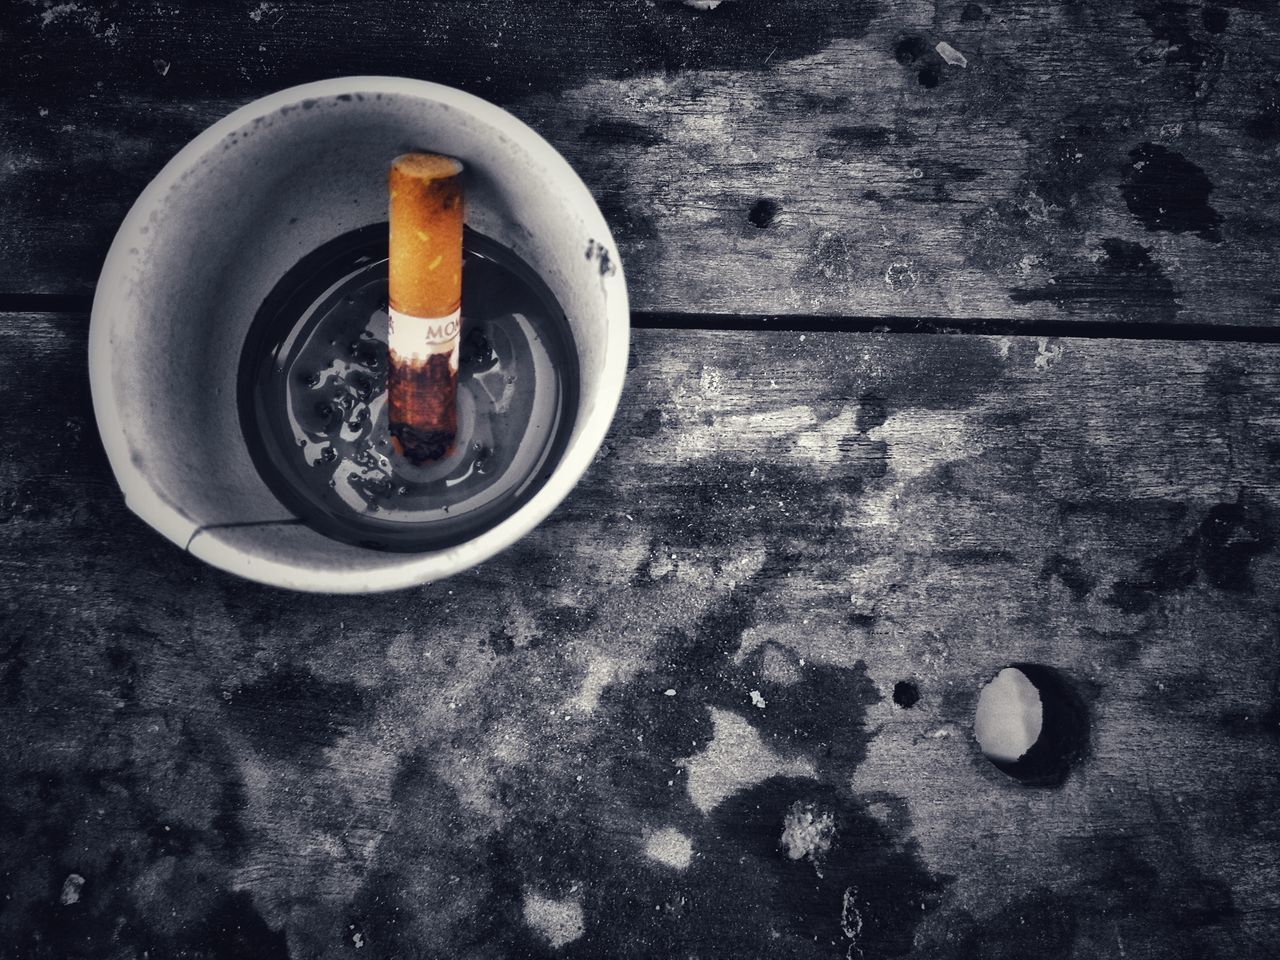 DIRECTLY ABOVE SHOT OF CIGARETTE SMOKING ON TABLE